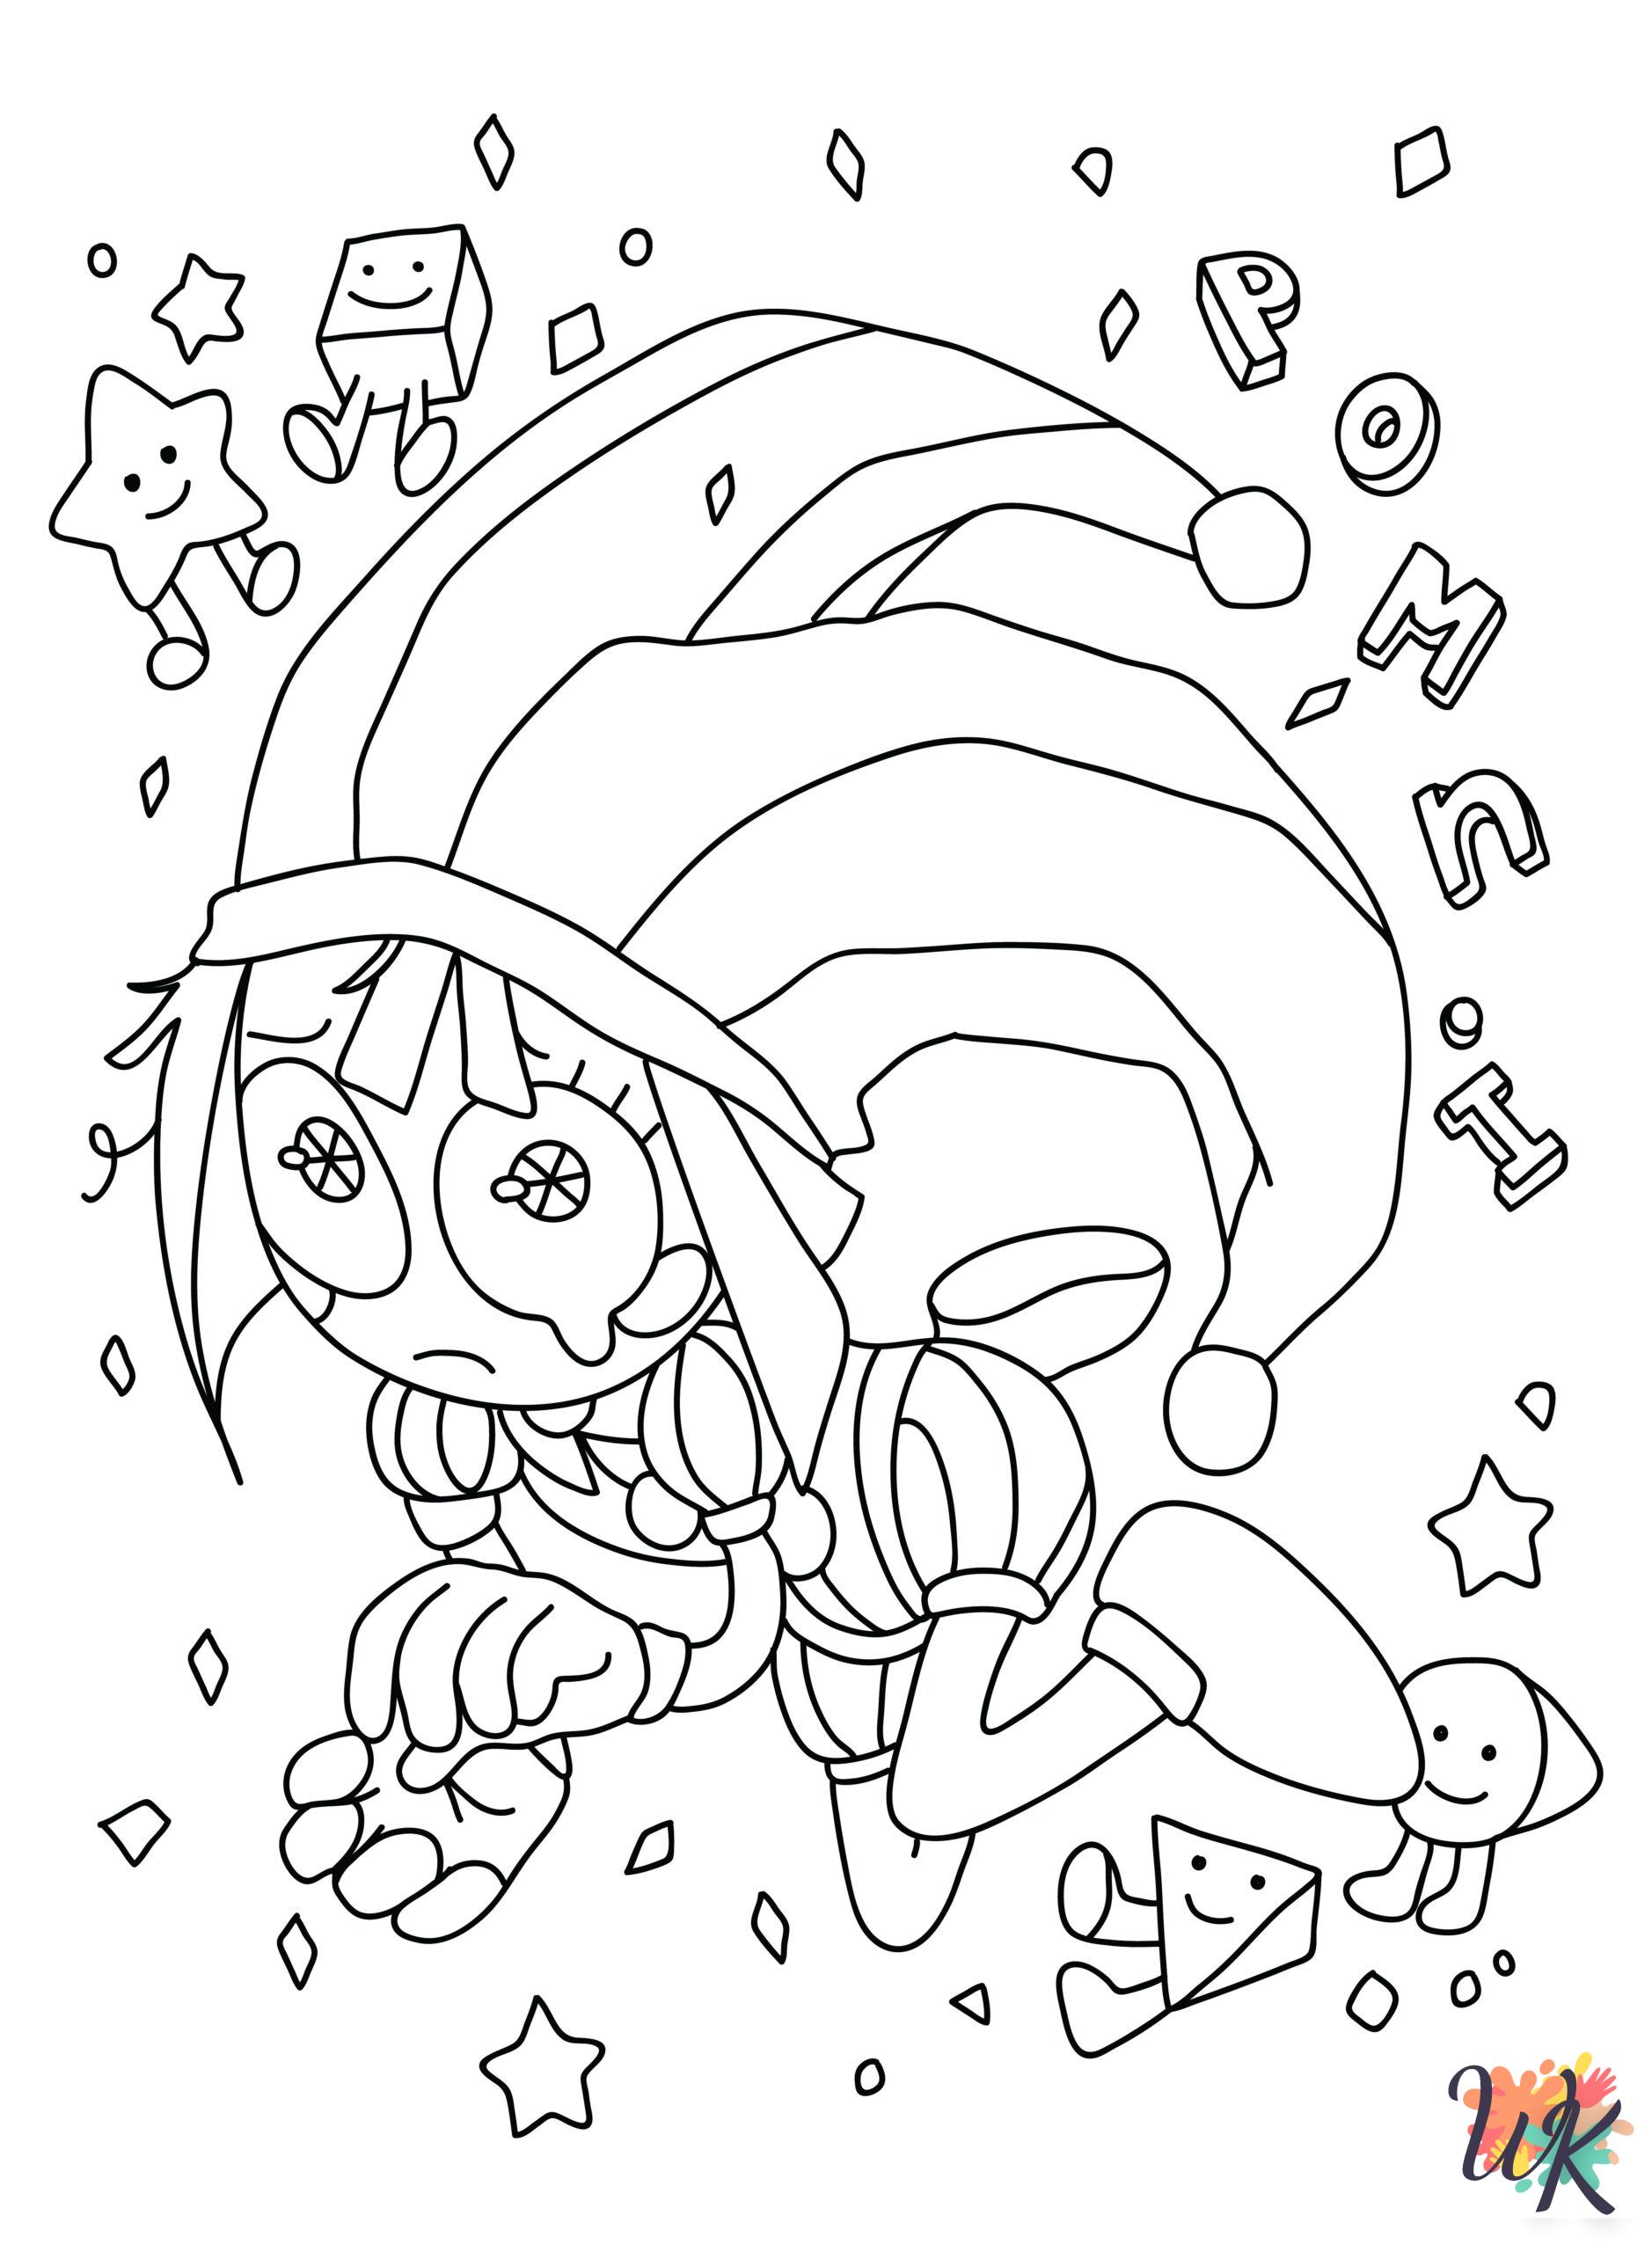 easy cute The Amazing Digital Circus coloring pages